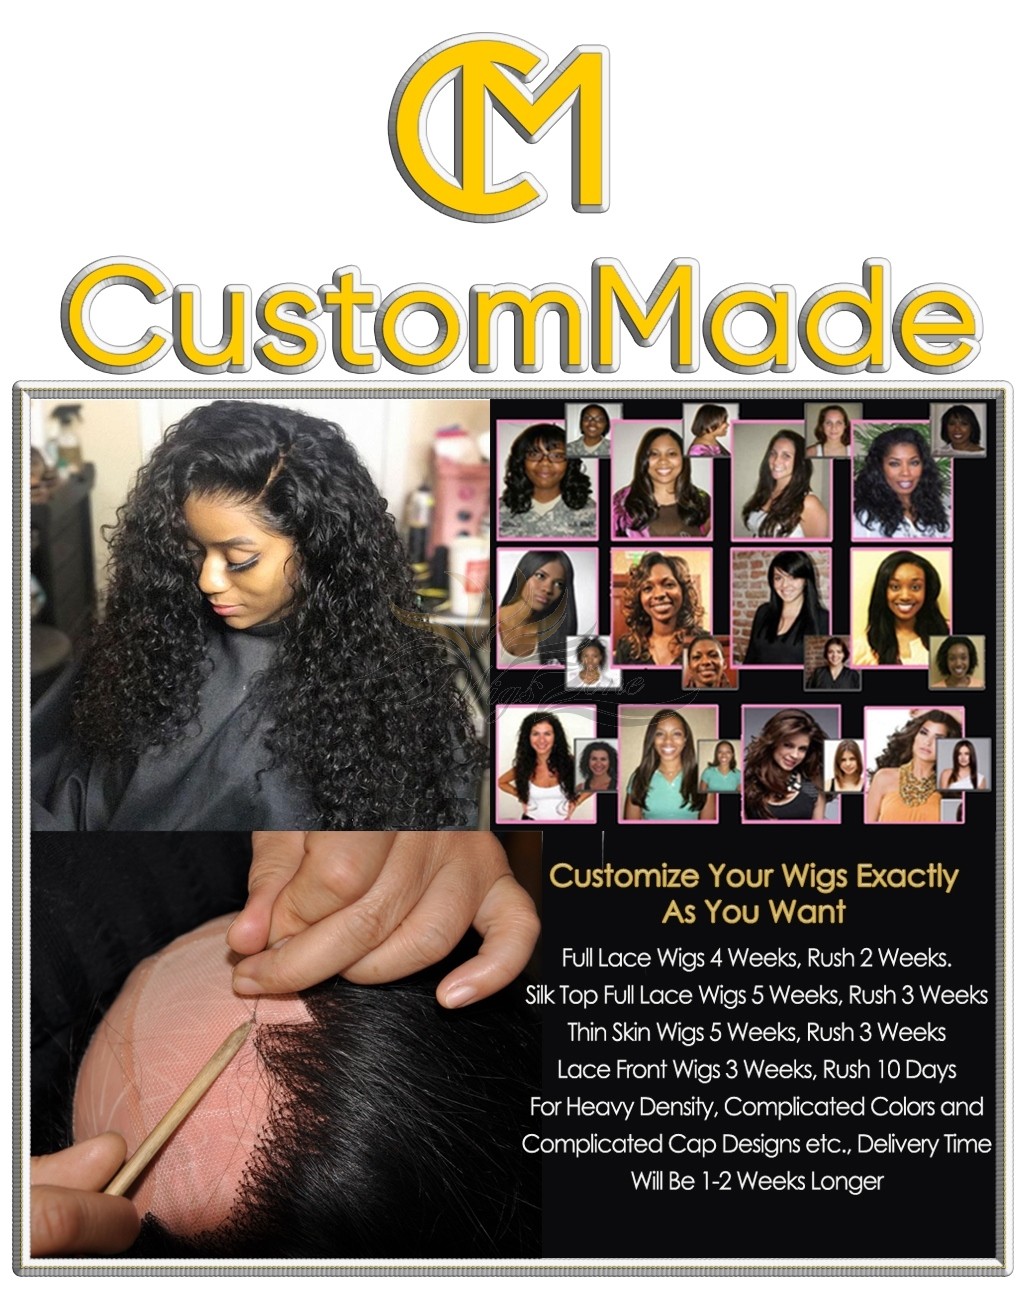 CUSTOM MADE LACE WIG EXACTLY AS YOU WANT [CM]